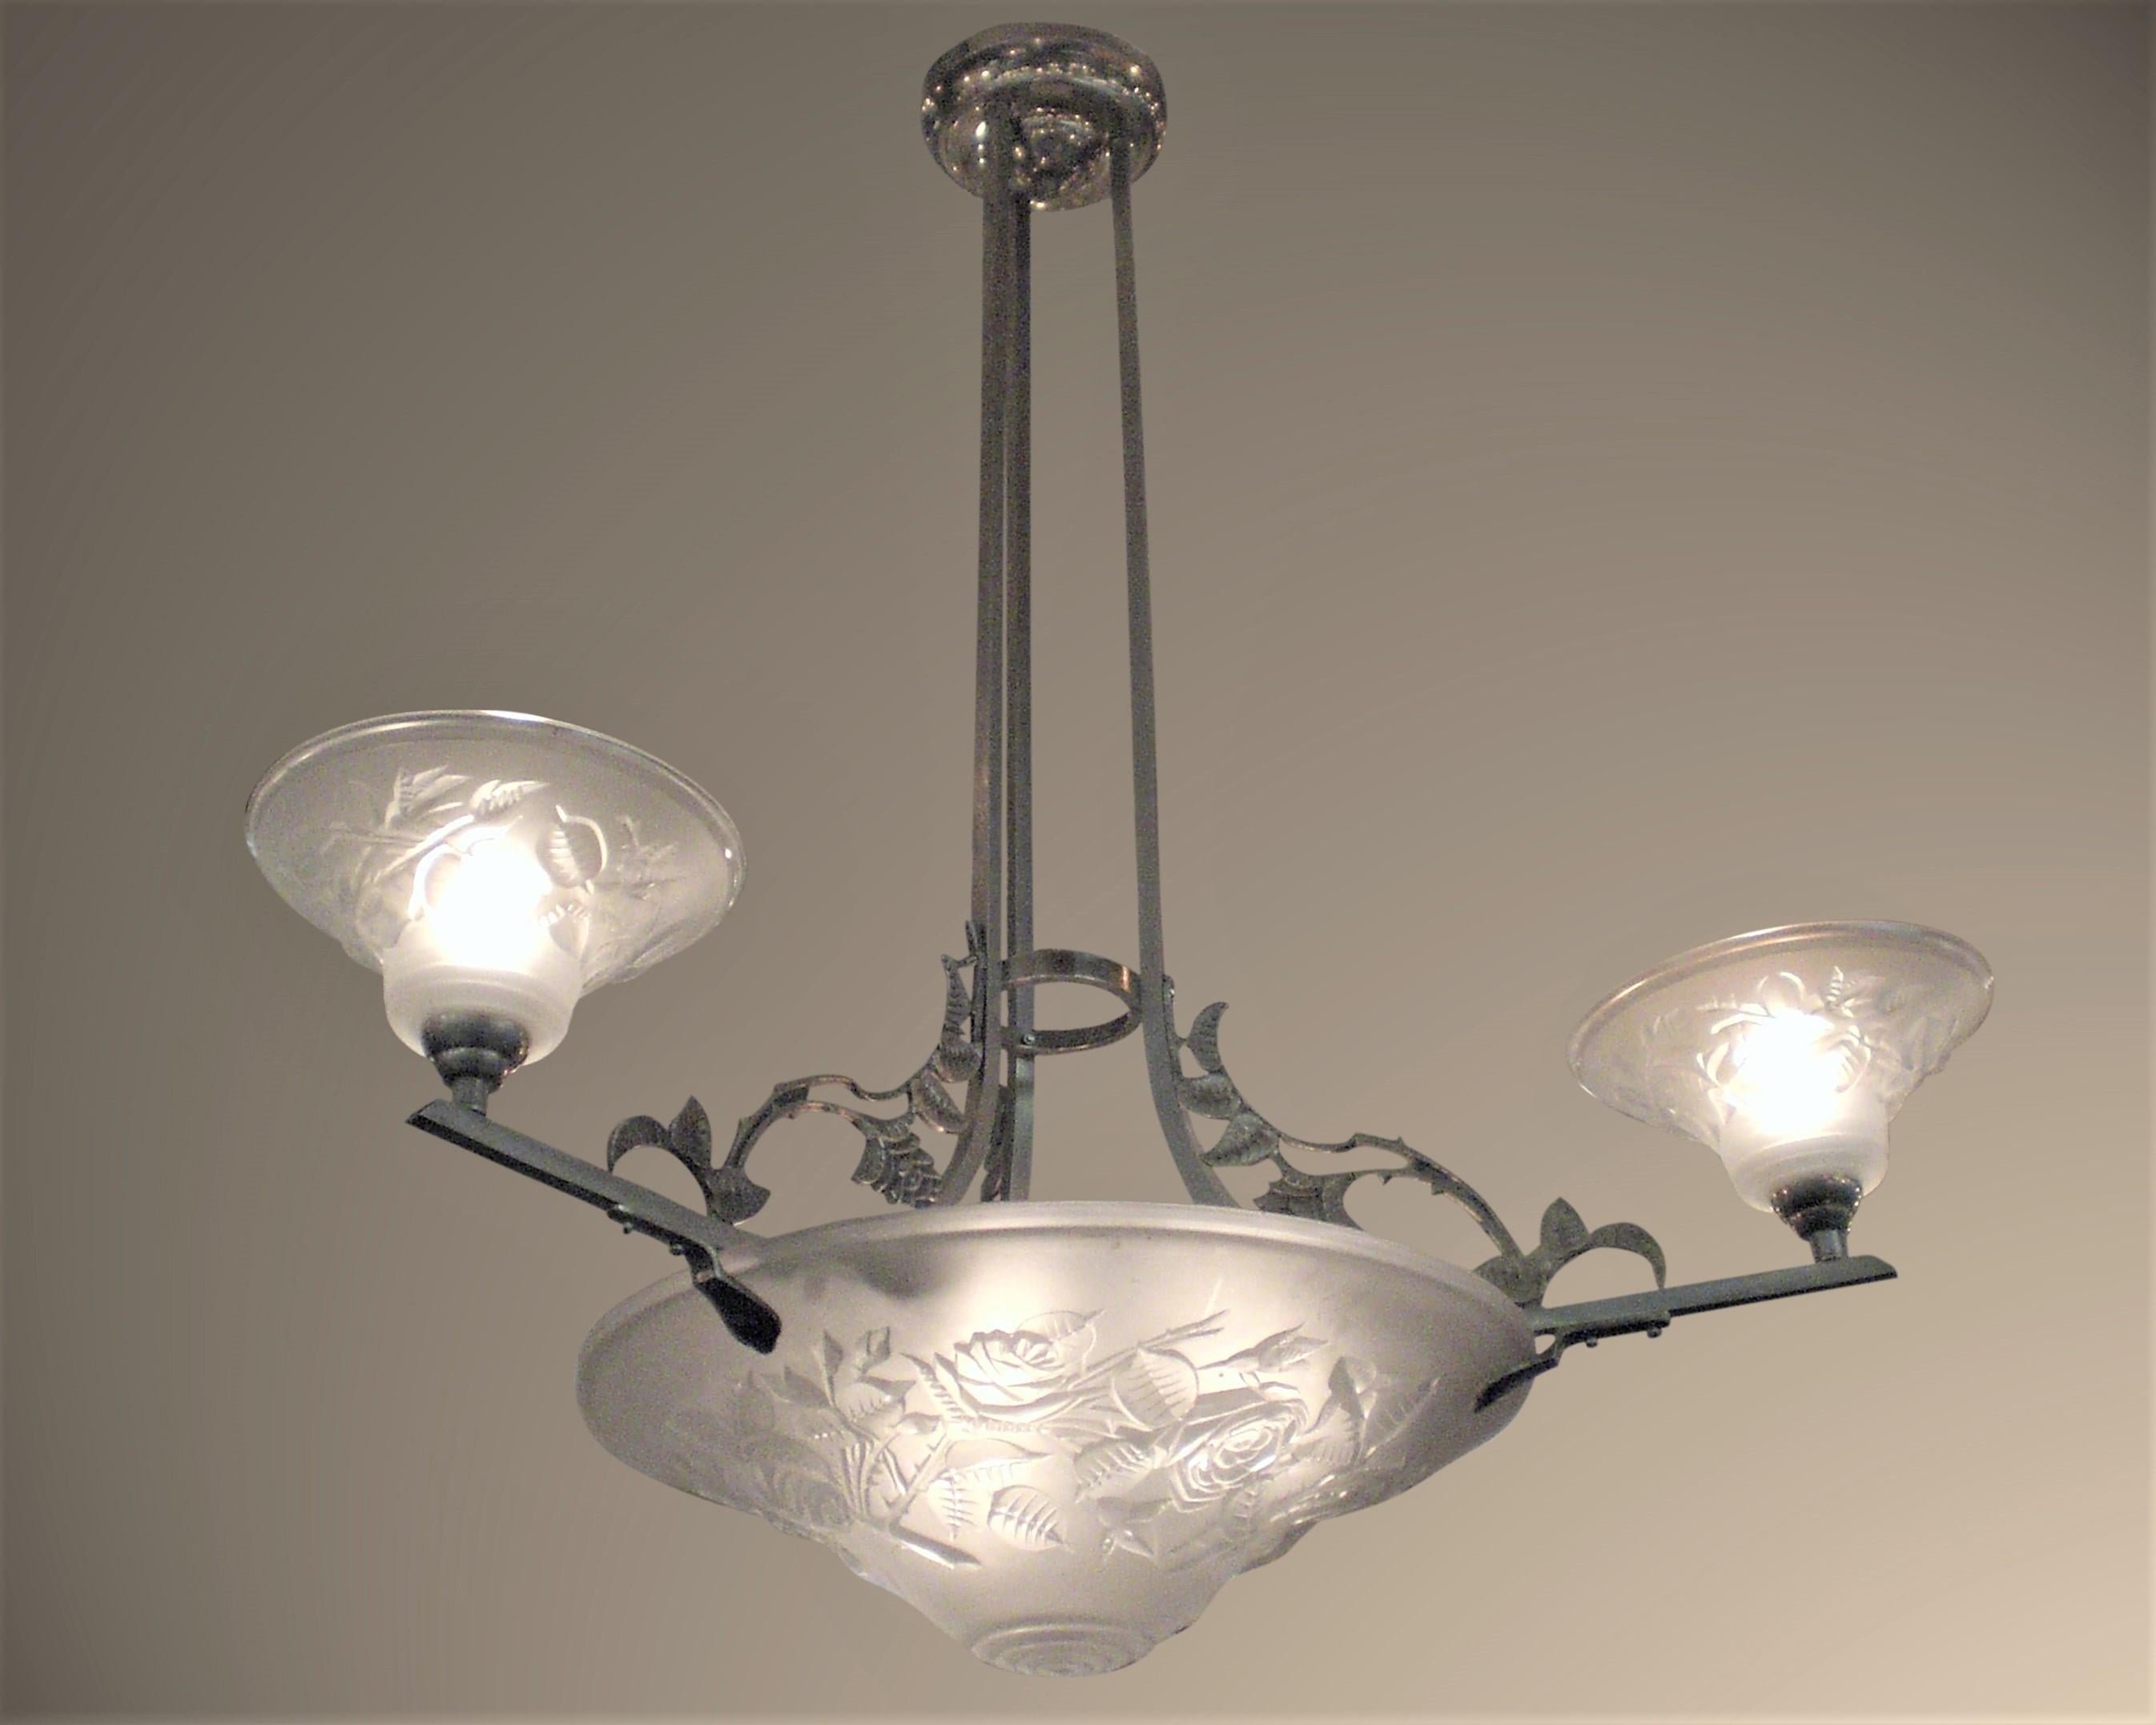 French Art Deco chandelier signed Maynadier, circa 1928, with a stylized motif of trellising briar rose vine and leaves. Three glass tulip shades with matching rose detailing focus light upward. Trailing rose motif is repeated on the satin